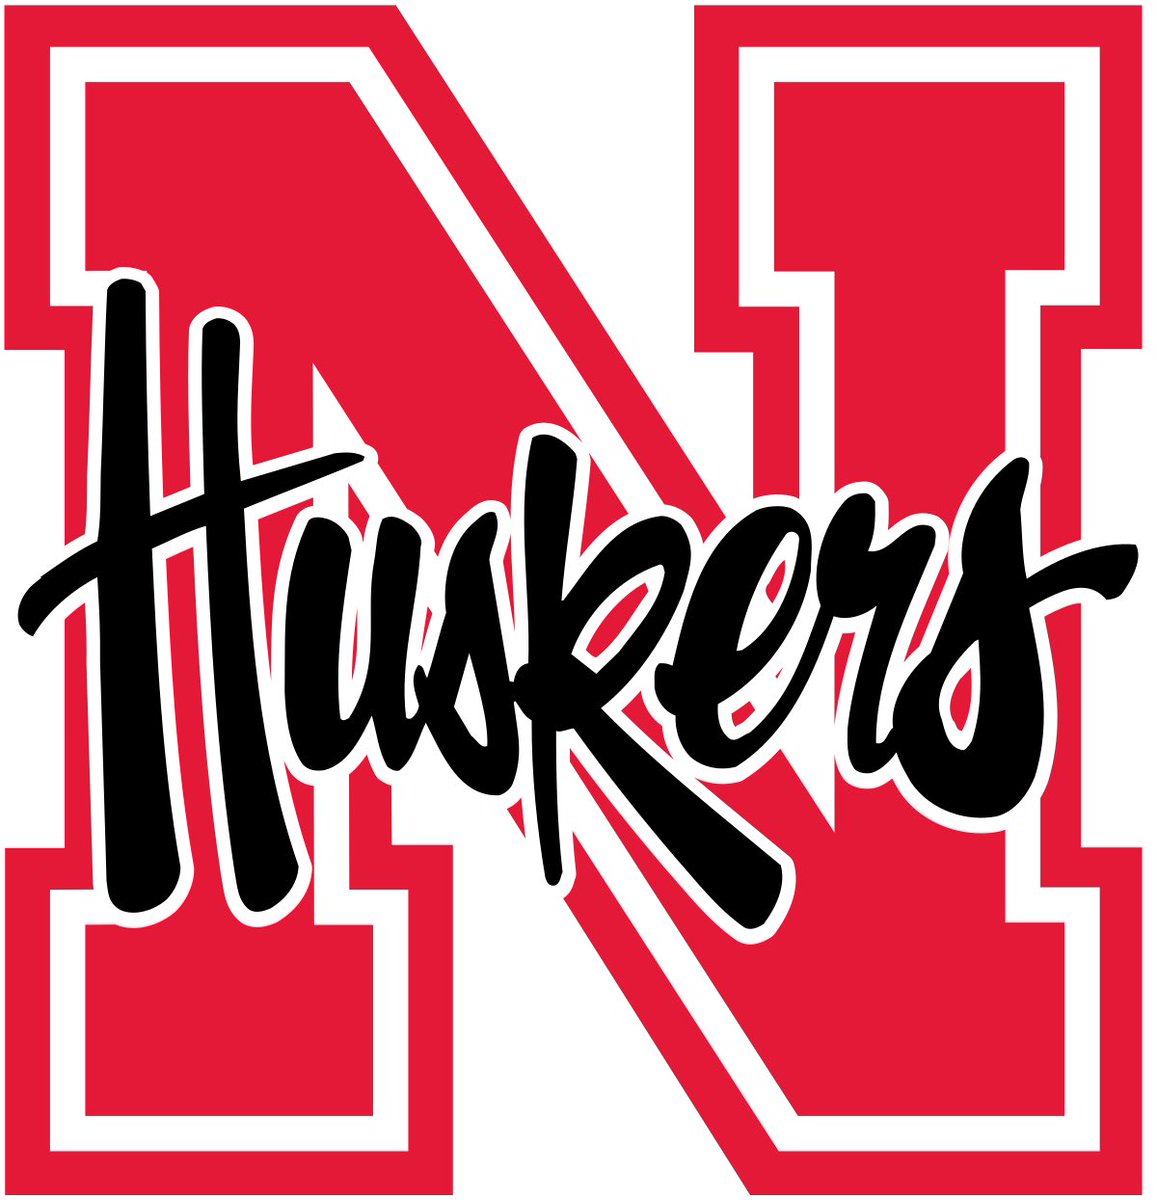 Blessed to say that l've received an offer from The University Of Nebraska🌽 #GBR #GoBigred🎈@evancooper2 @Cen10Football @GregBiggins @kryan247 @tomloy247 @ChadSimmons_ @adamgorney